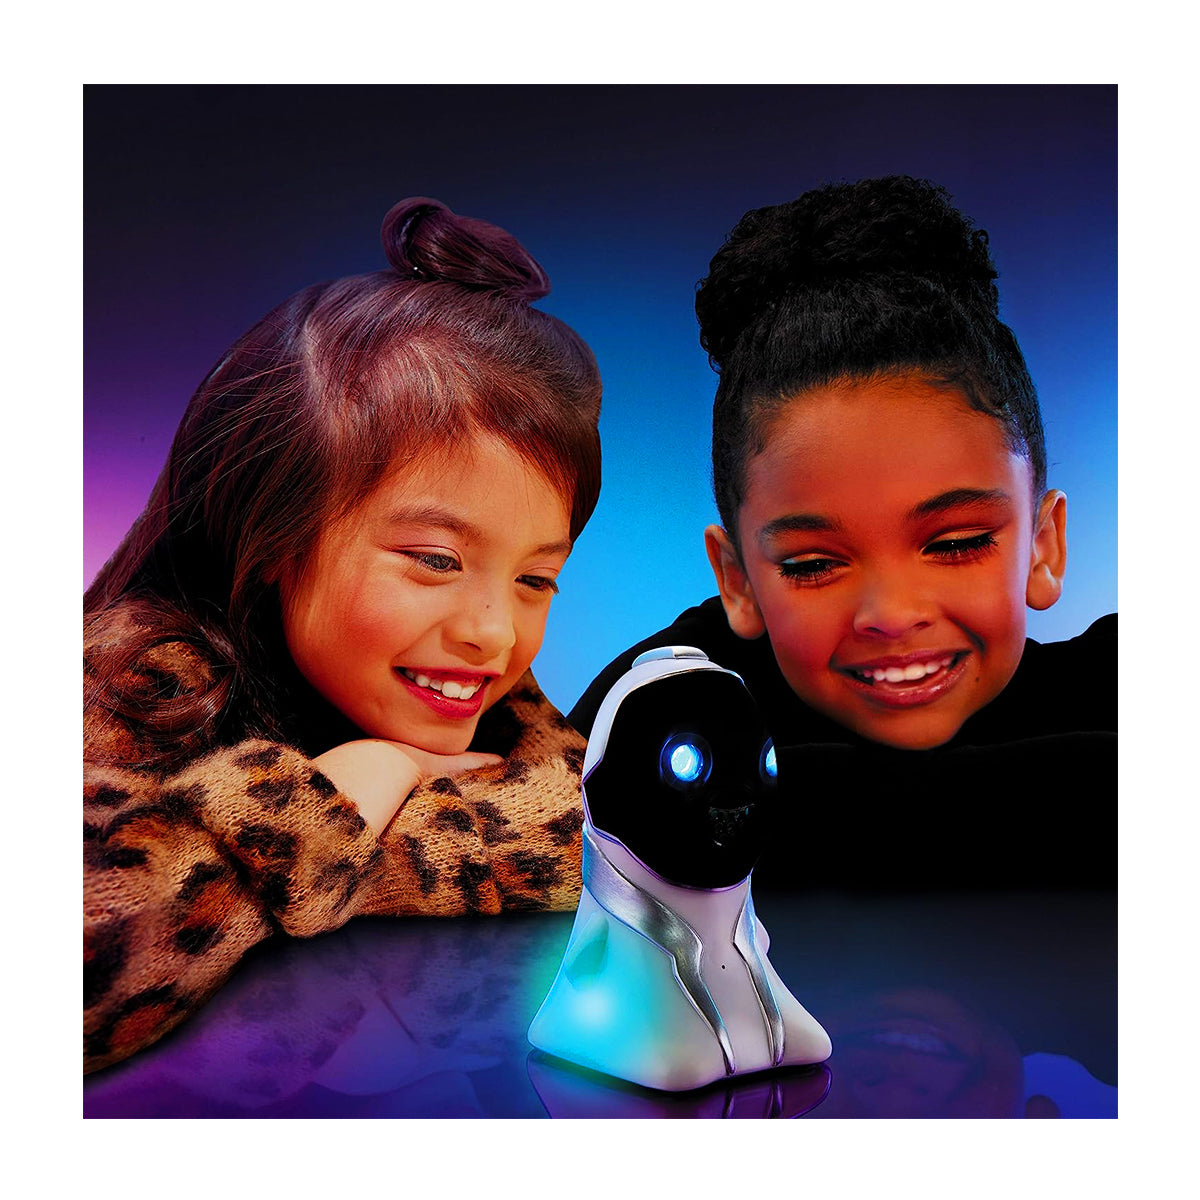 Tobi Friends Interactive Electronic Voice-Activated